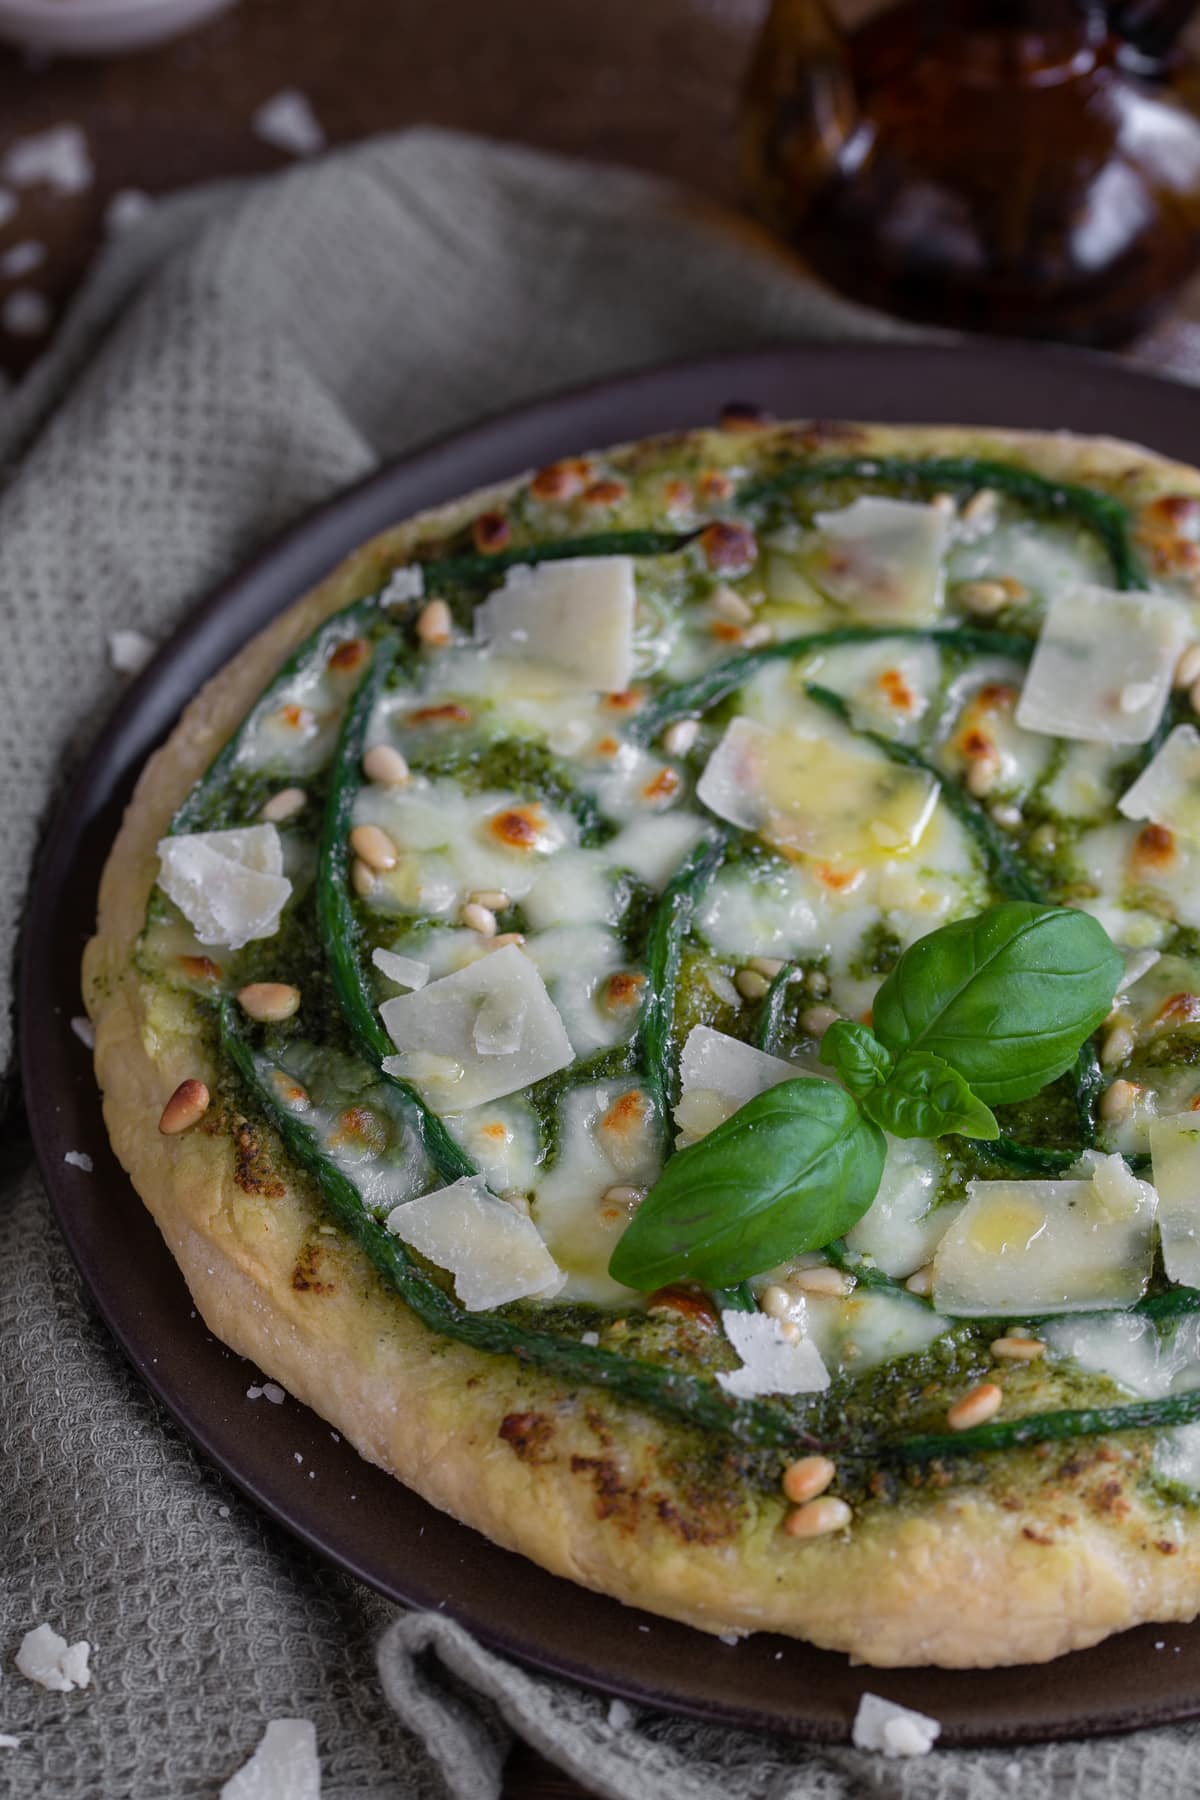 Pesto pizza with green beans topped with pine nuts and parmesan flakes.